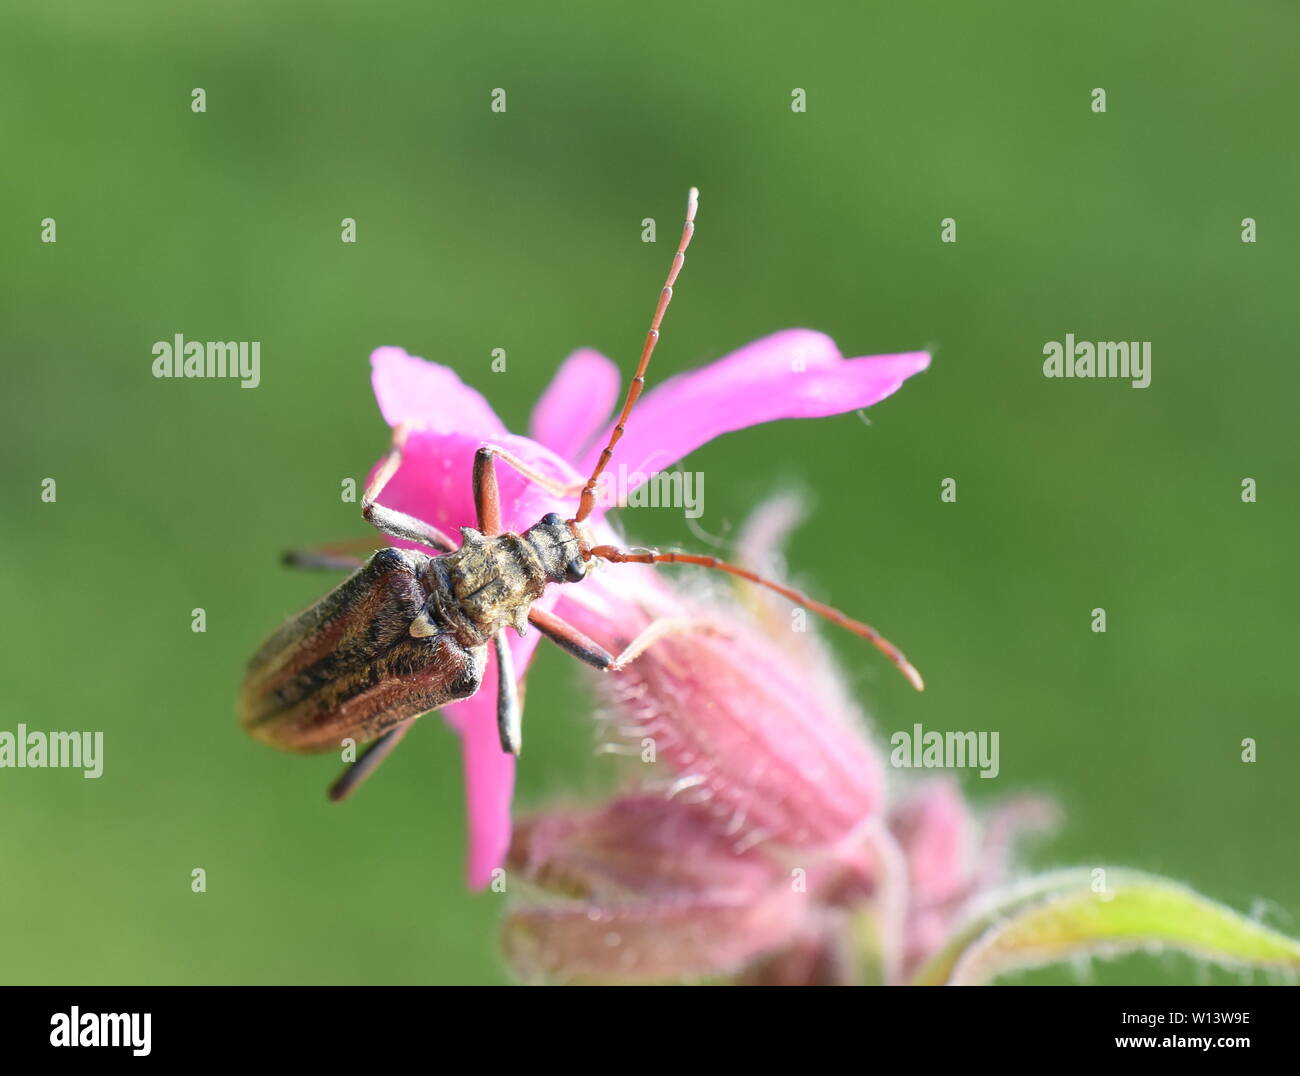 The longhorn beetle Oxymirus cursor female on a pink flower Stock Photo